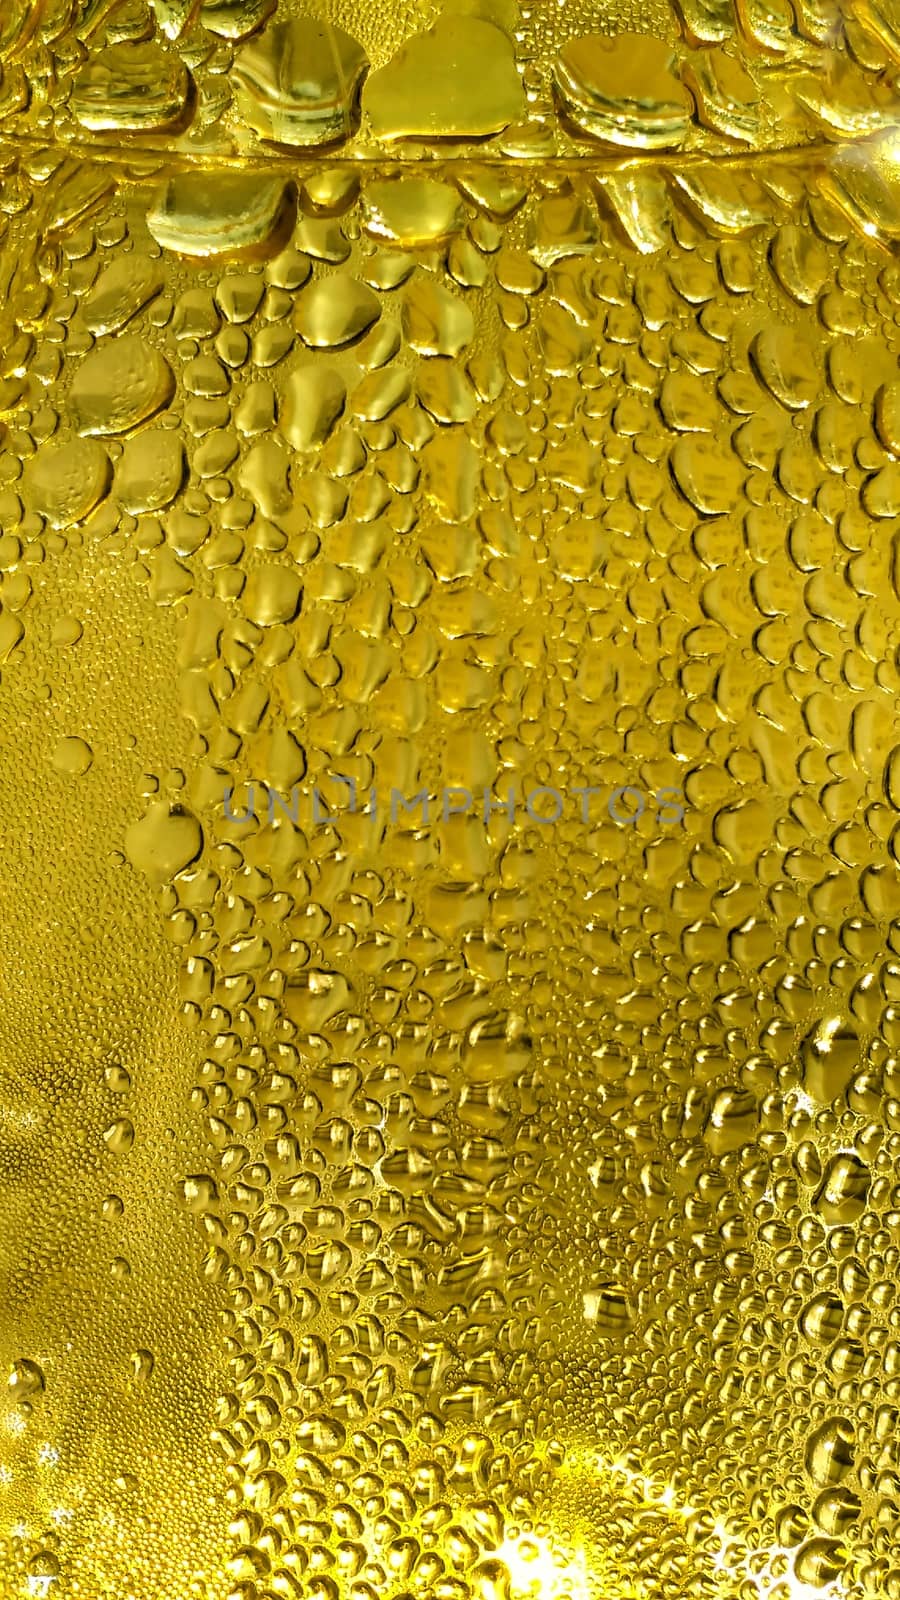 Texture of evaporated water in a yellow vaporizer by soniabonet